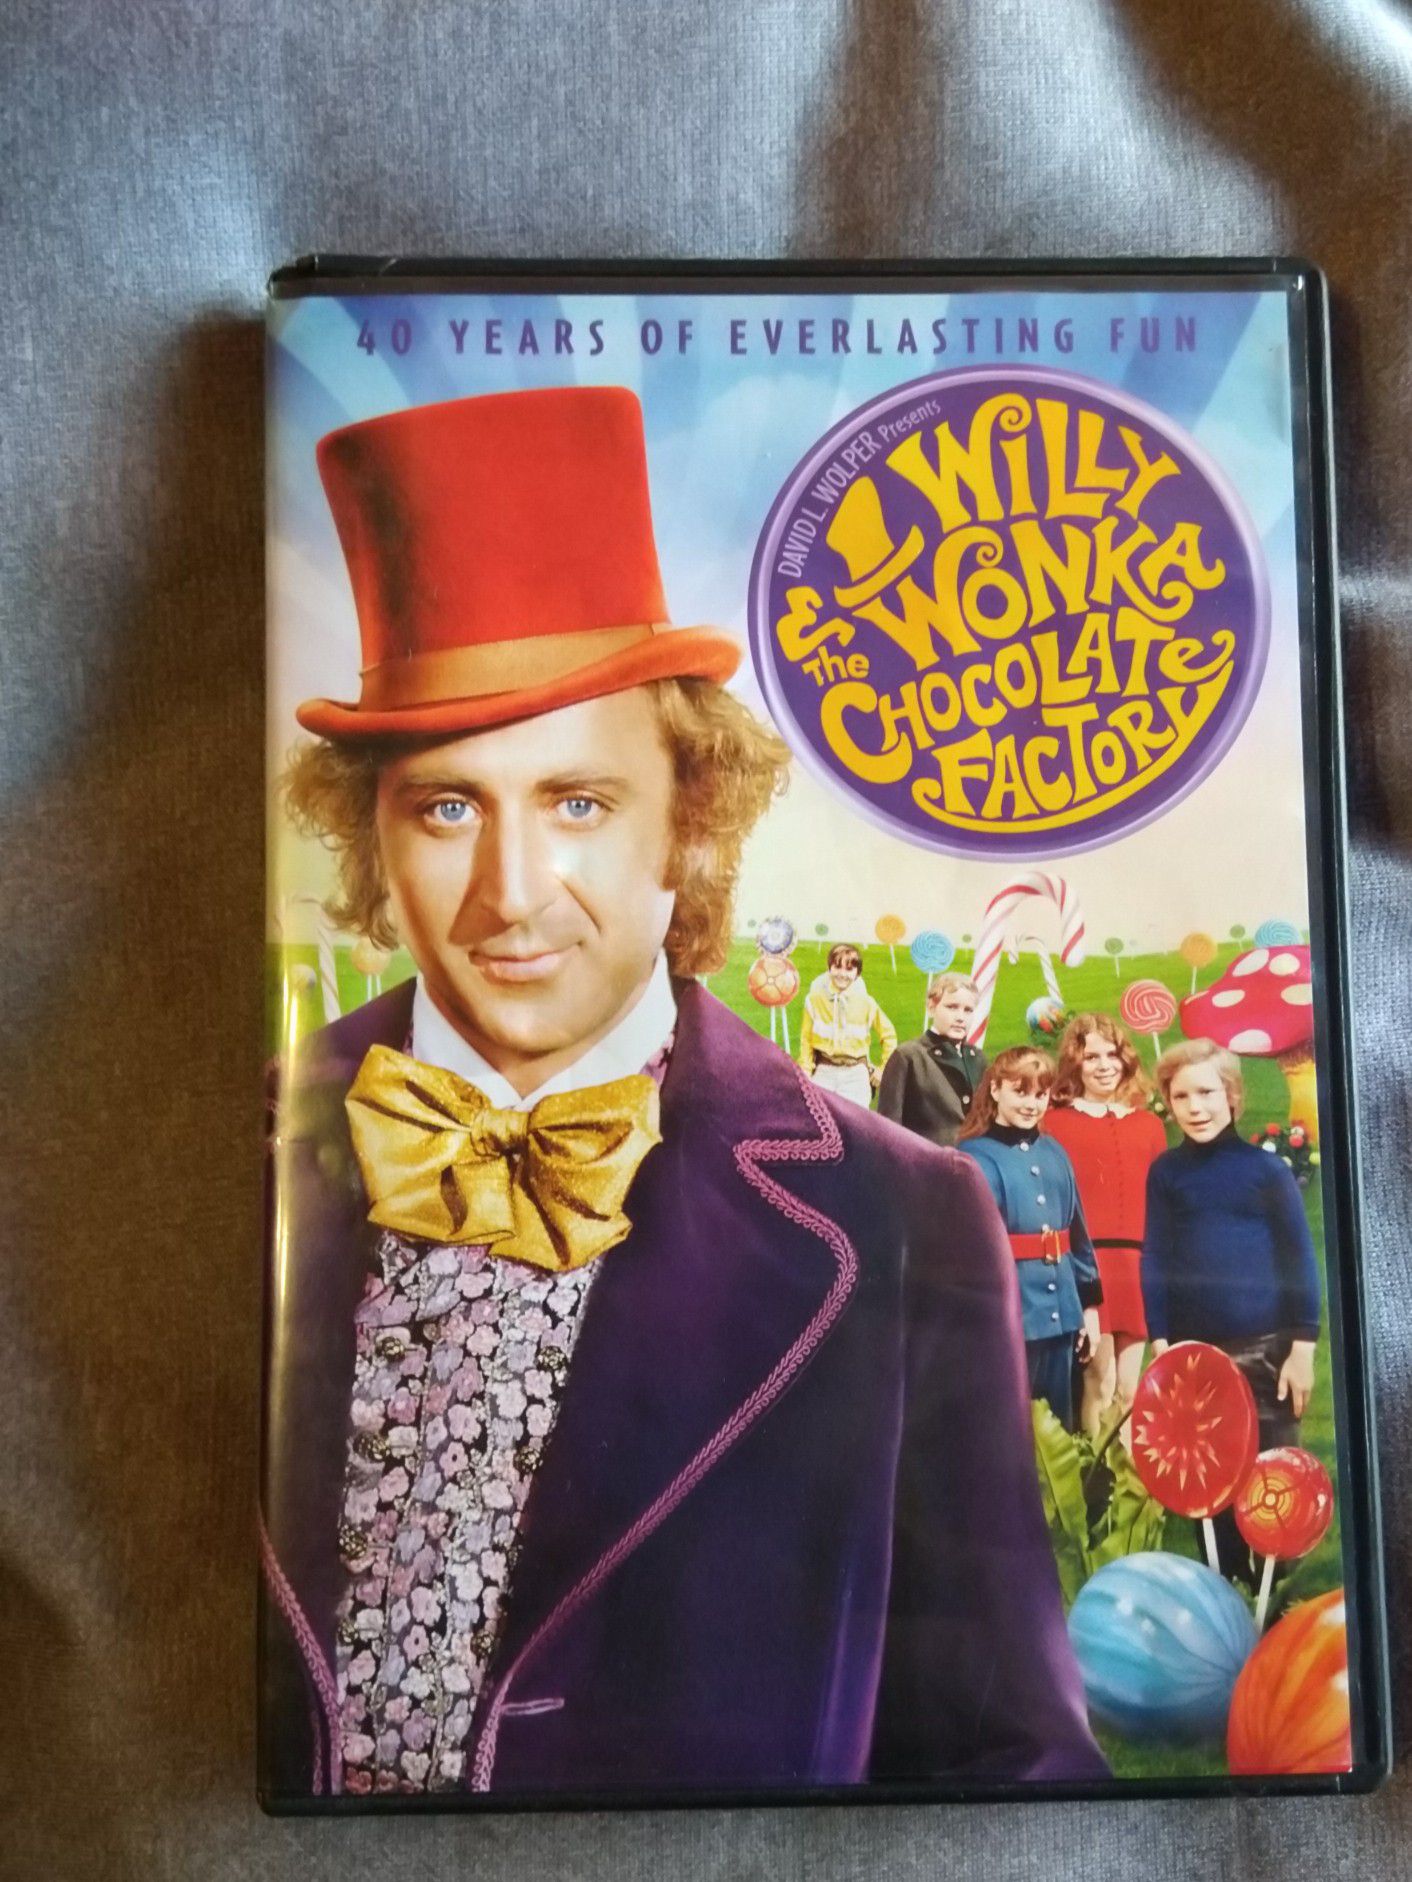 Willy Wonka and the chocolate factory